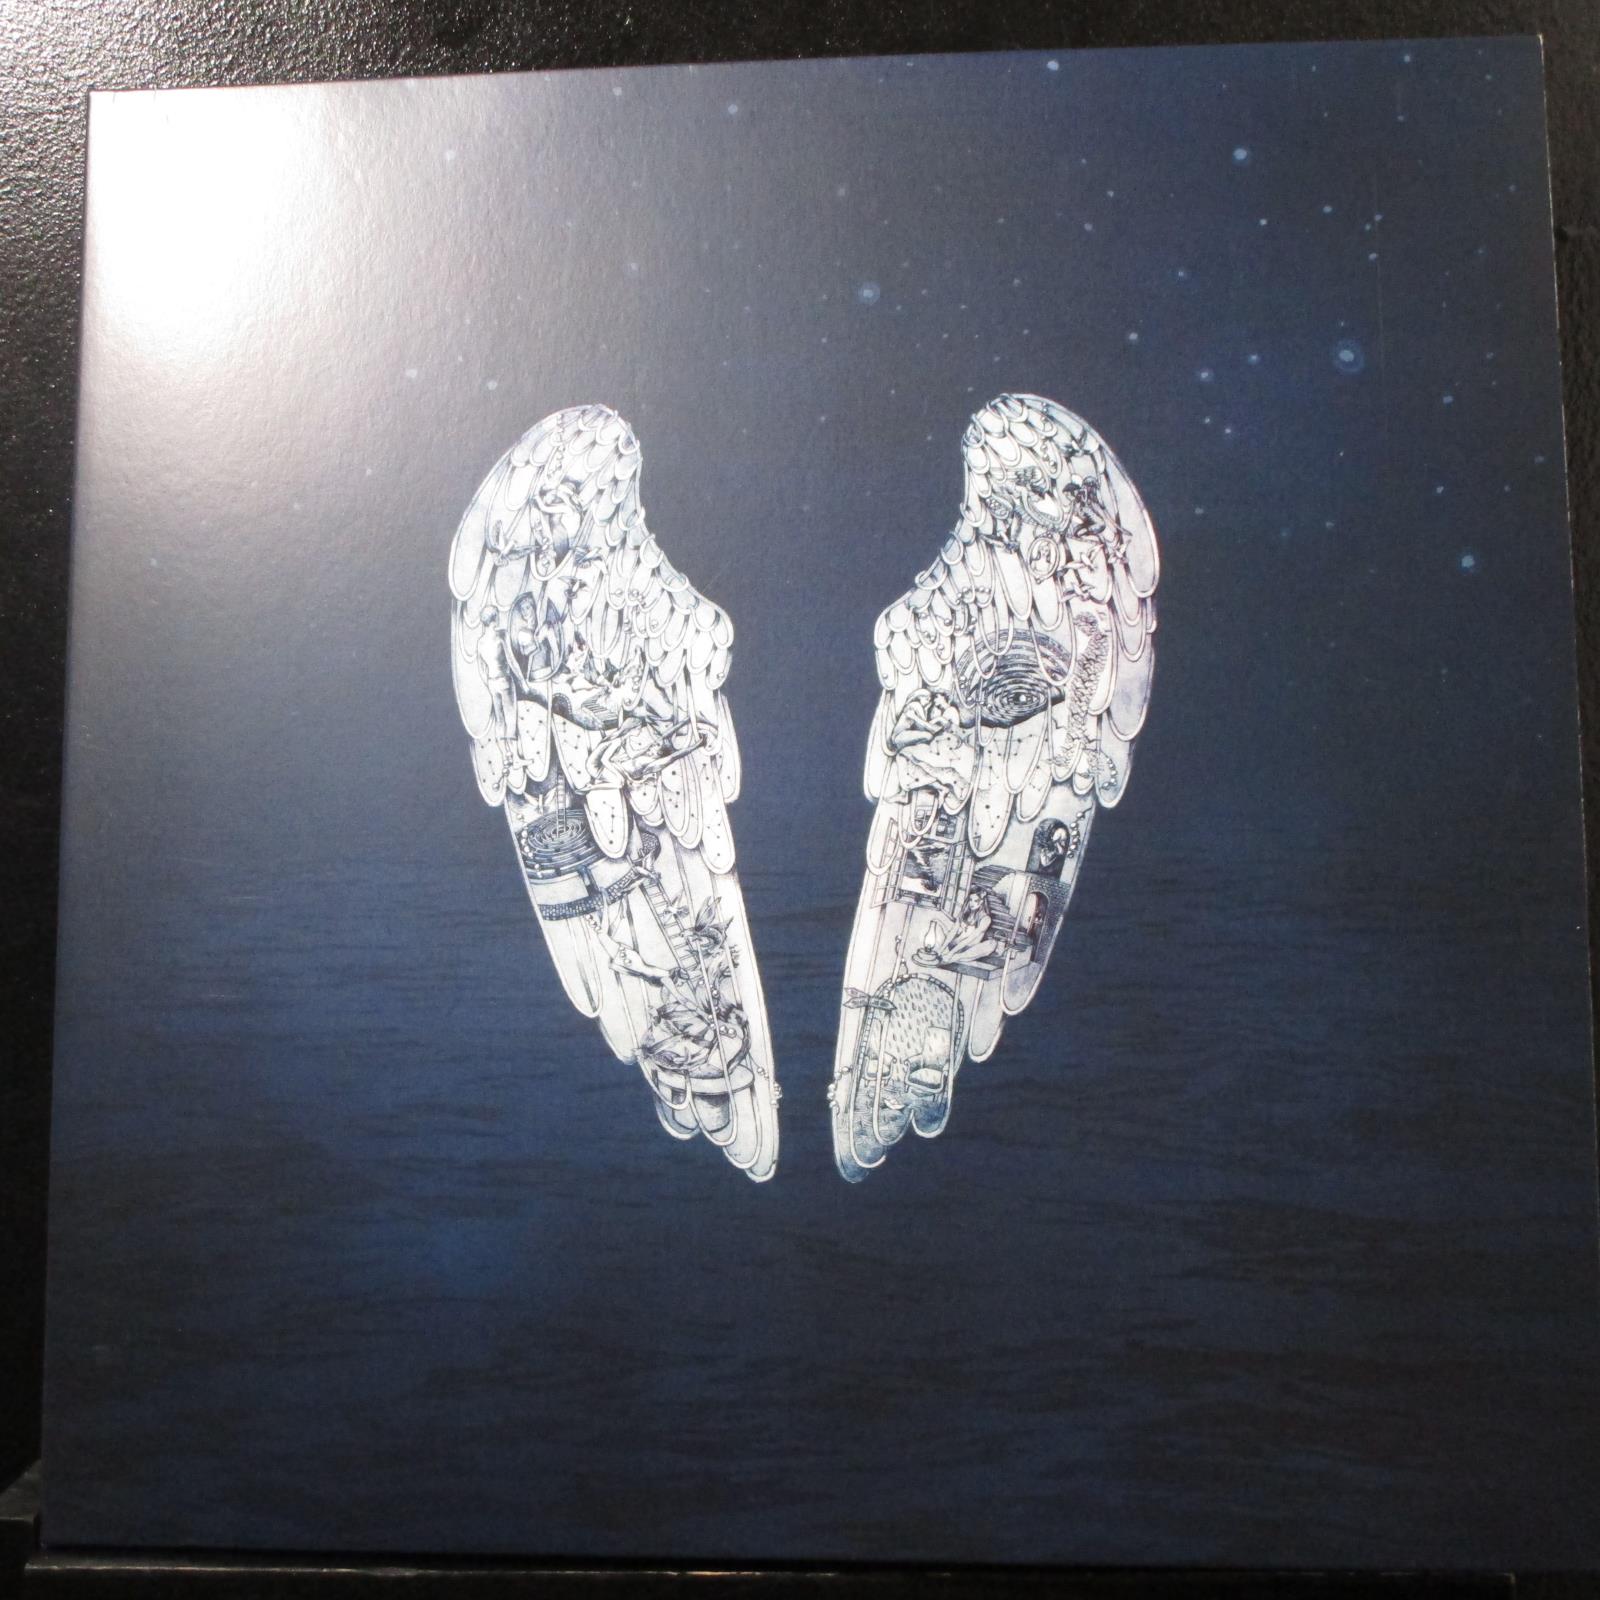 Details About Coldplay Ghost Stories Lp Mint 542279 1 Europe 2014 Vinyl Record Wmp3 - 